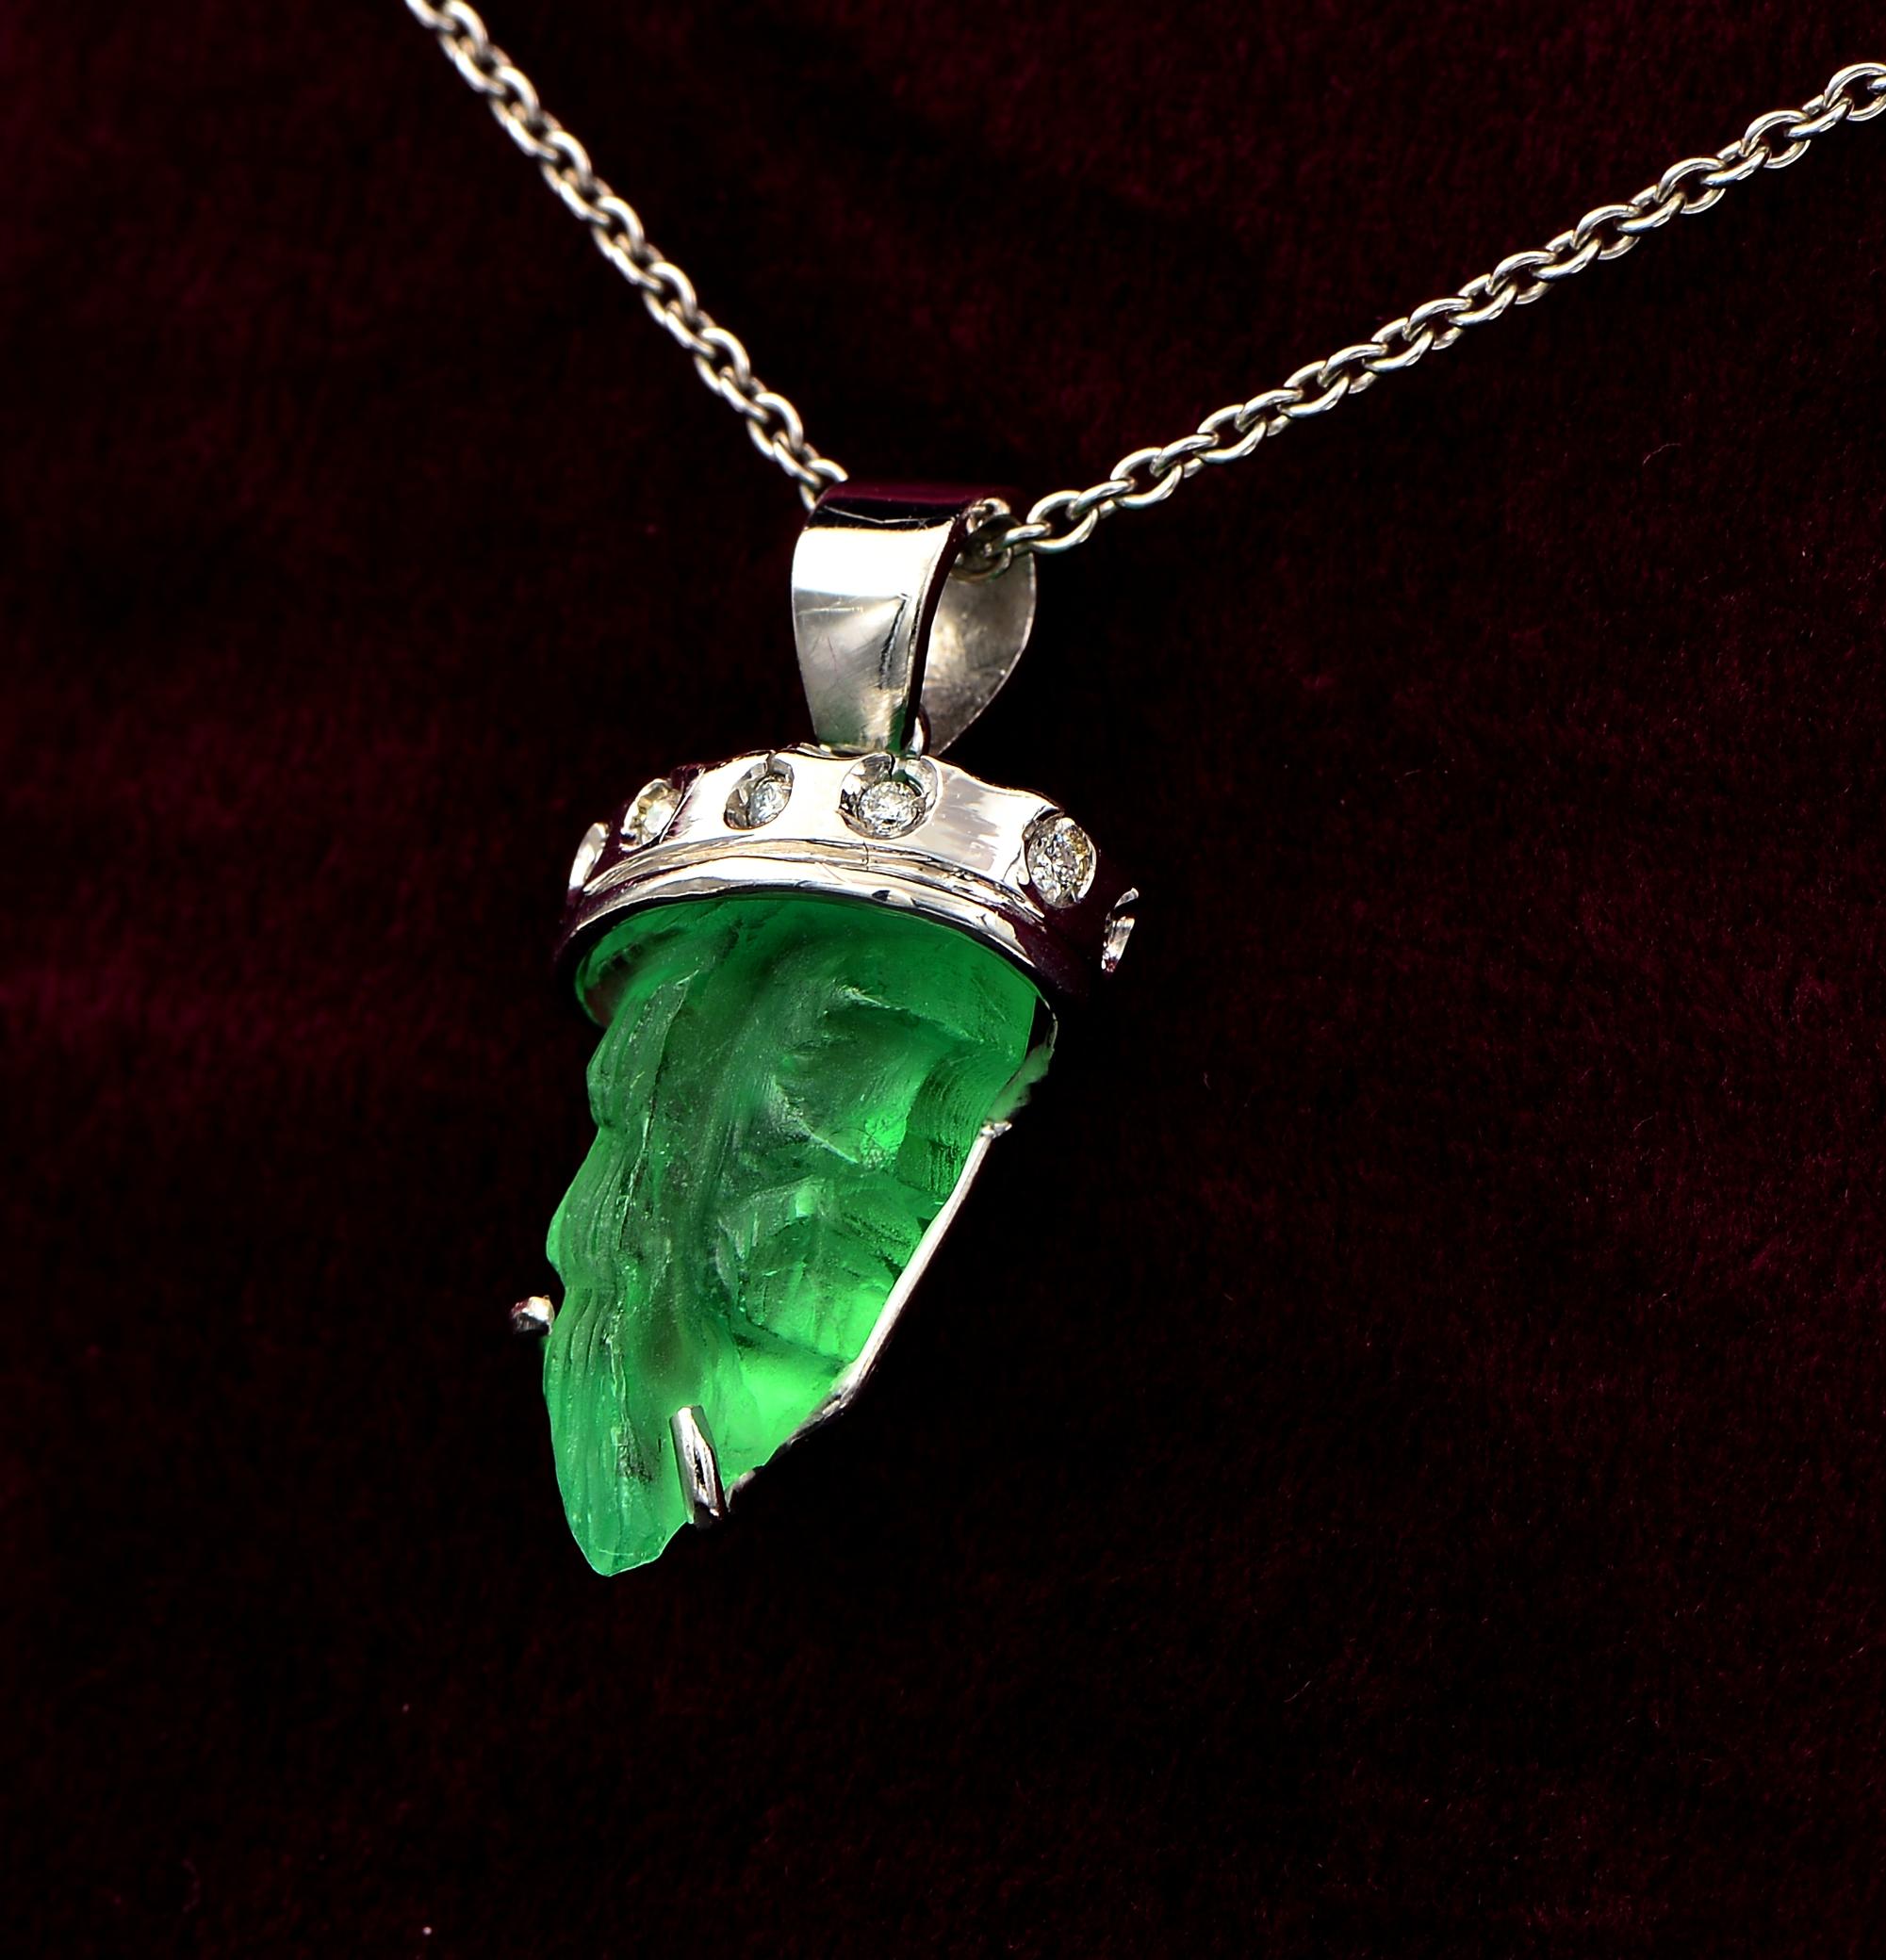 Rare and Unusual
This beautiful vintage pendant is 1960 ca – featuring crowned Jesus hand sculptured from a natural Emerald, with crown made of solid 18 KT white gold highlight by Diamond accent
Rare and unusual, skilful carved with an impressive